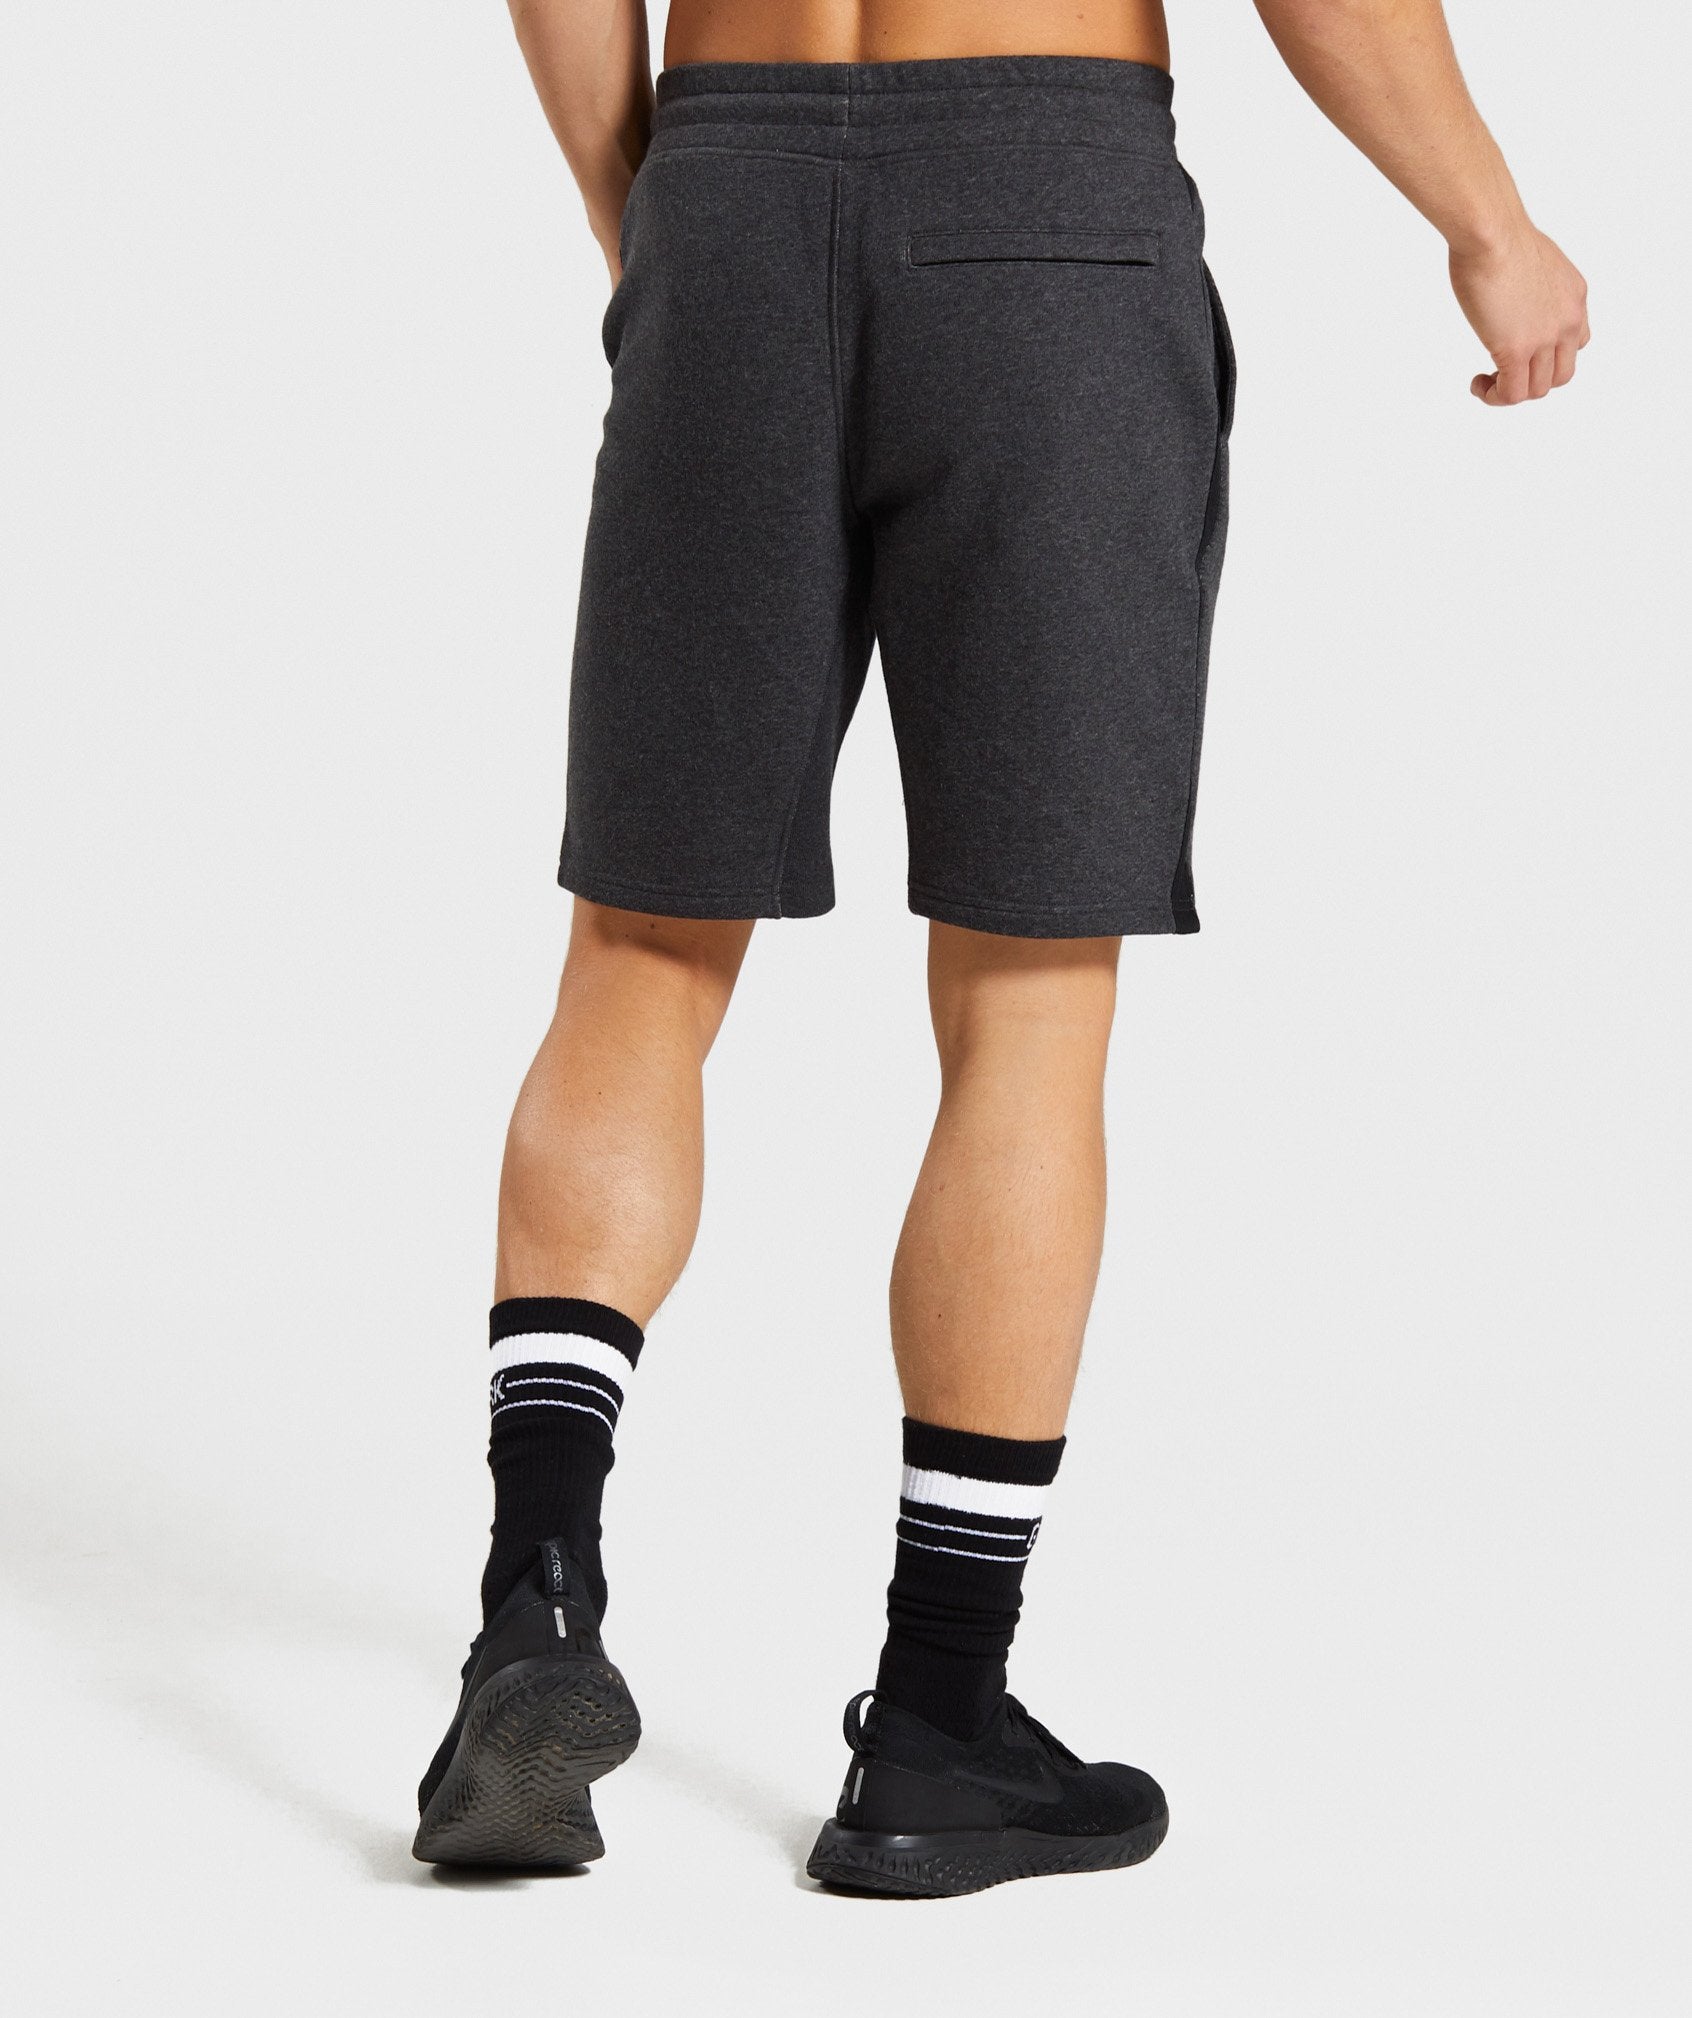 Compound Shorts in Black Marl - view 2